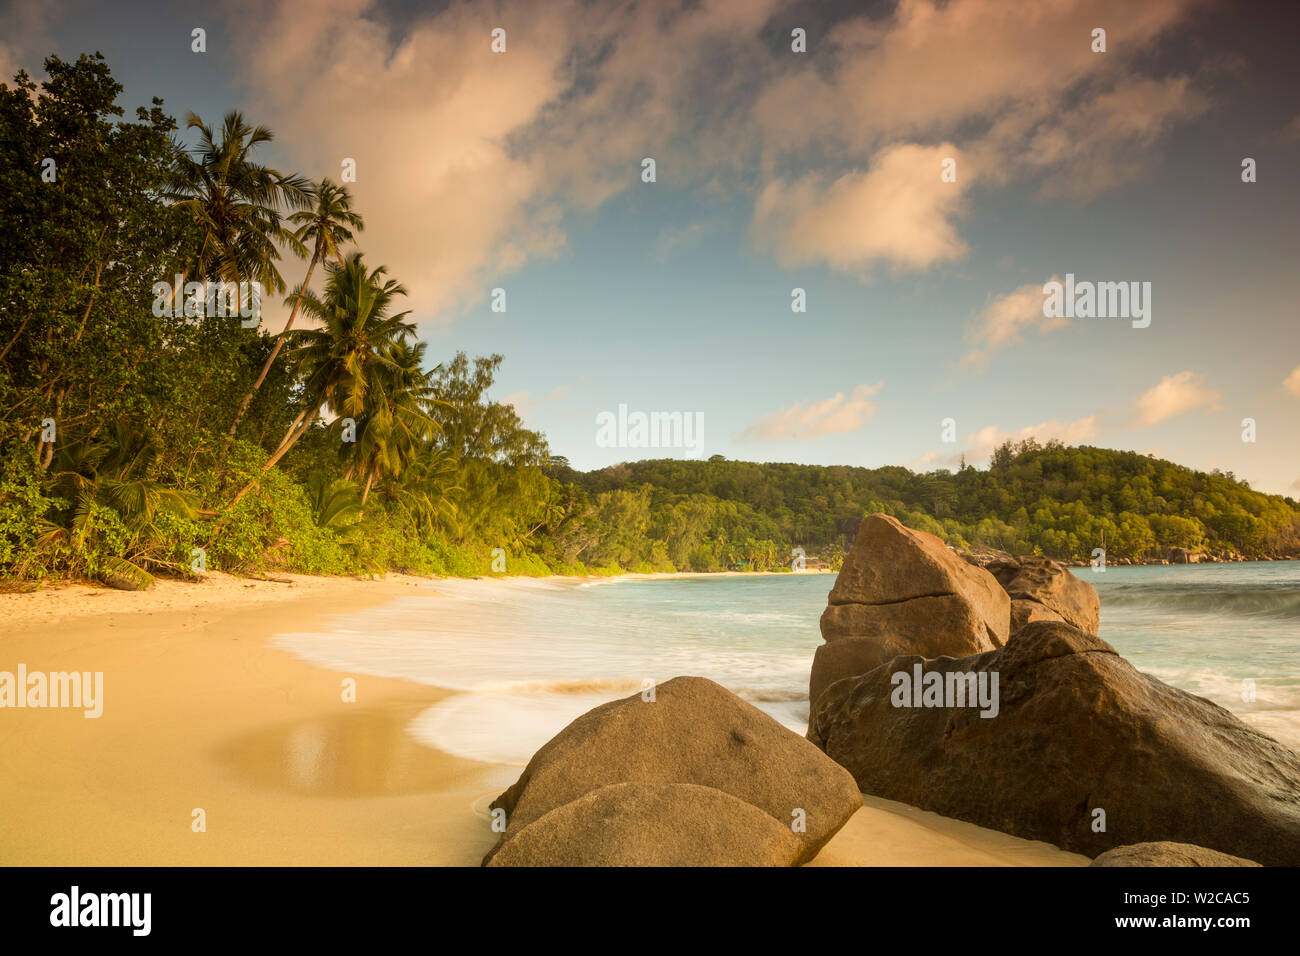 Palm trees and tropical beach, southern Mahe, Seychelles Stock Photo